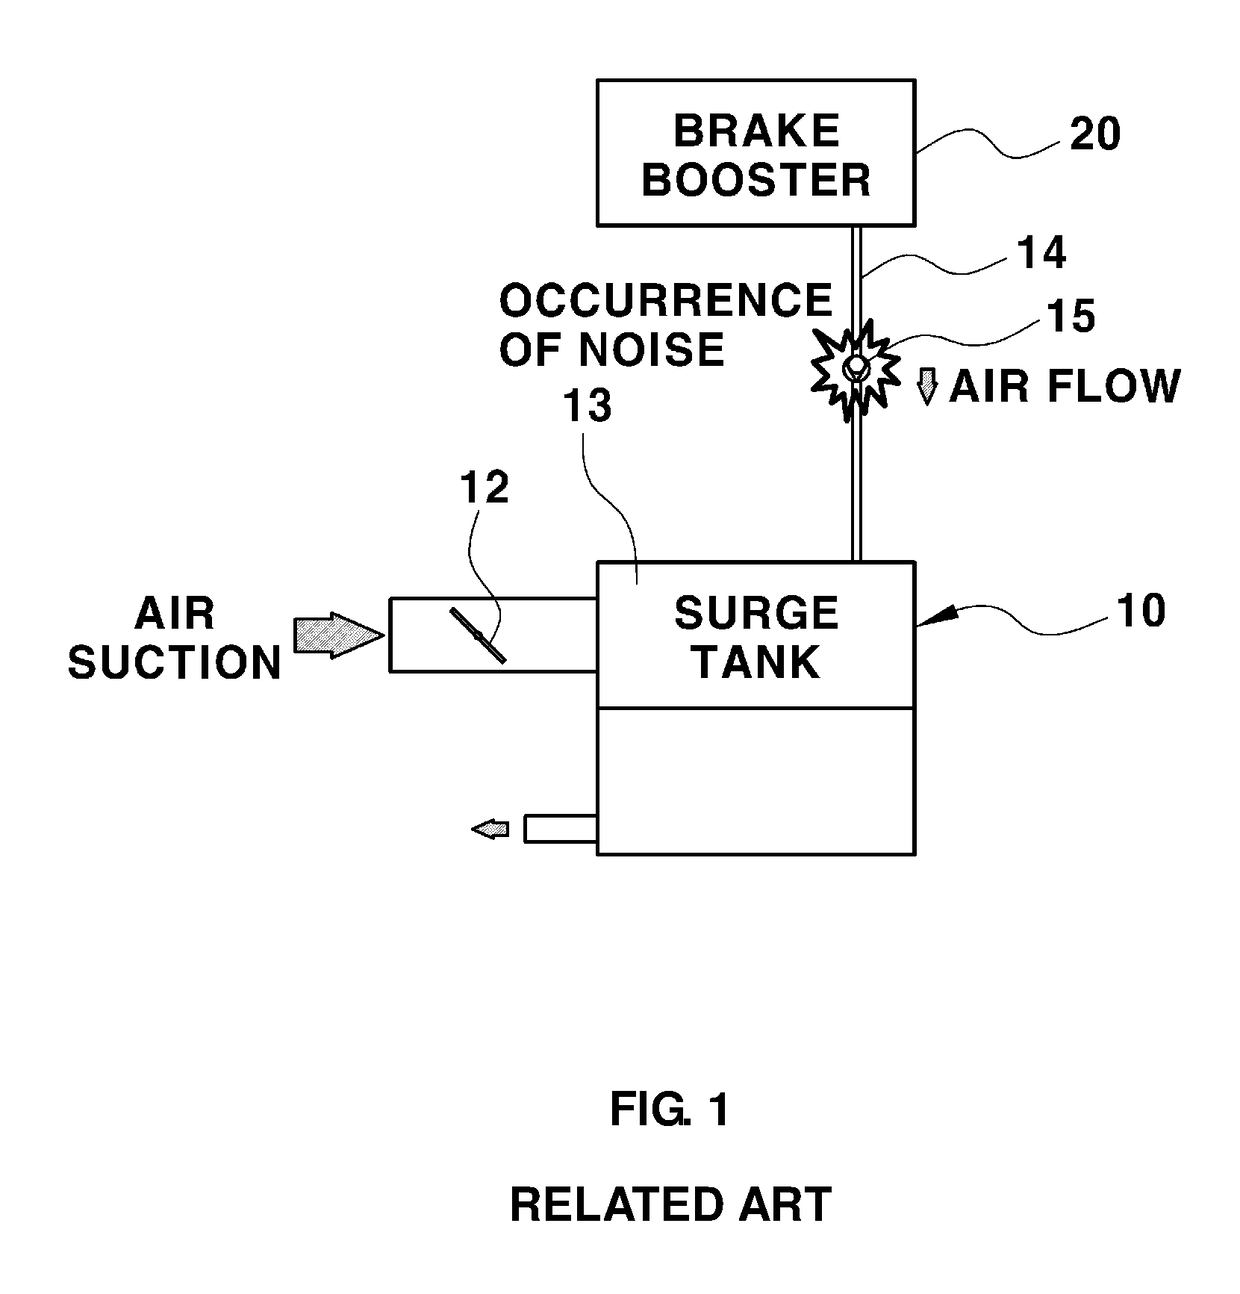 Noise reduction device for negative pressure line of brake booster